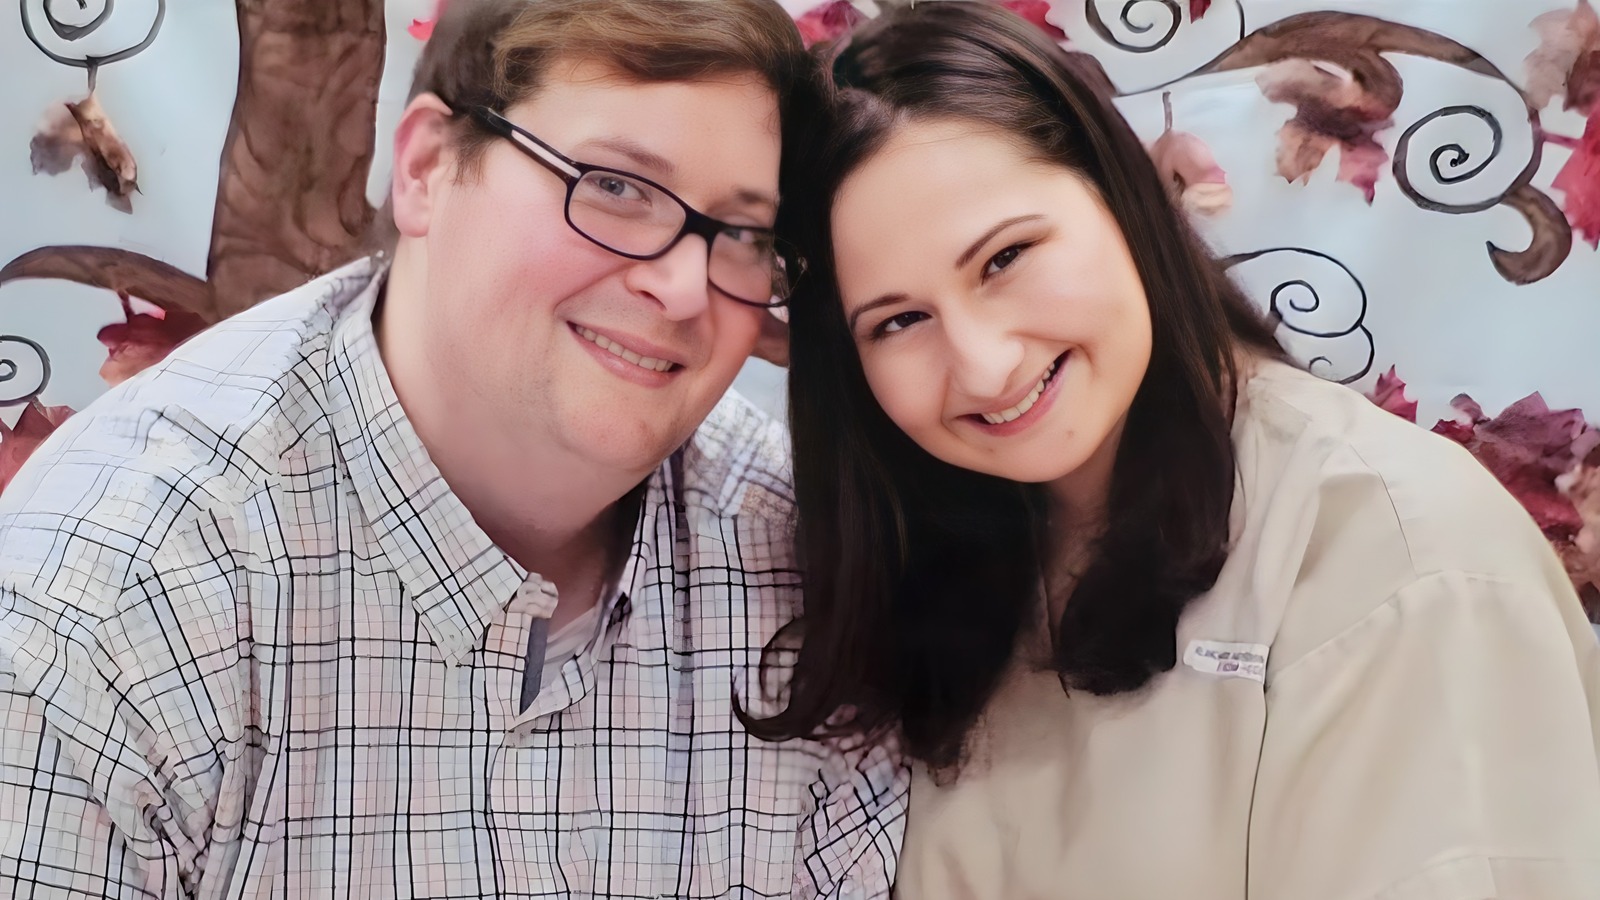 Inside Gypsy Rose Blanchard's Relationship With Her Husband The List